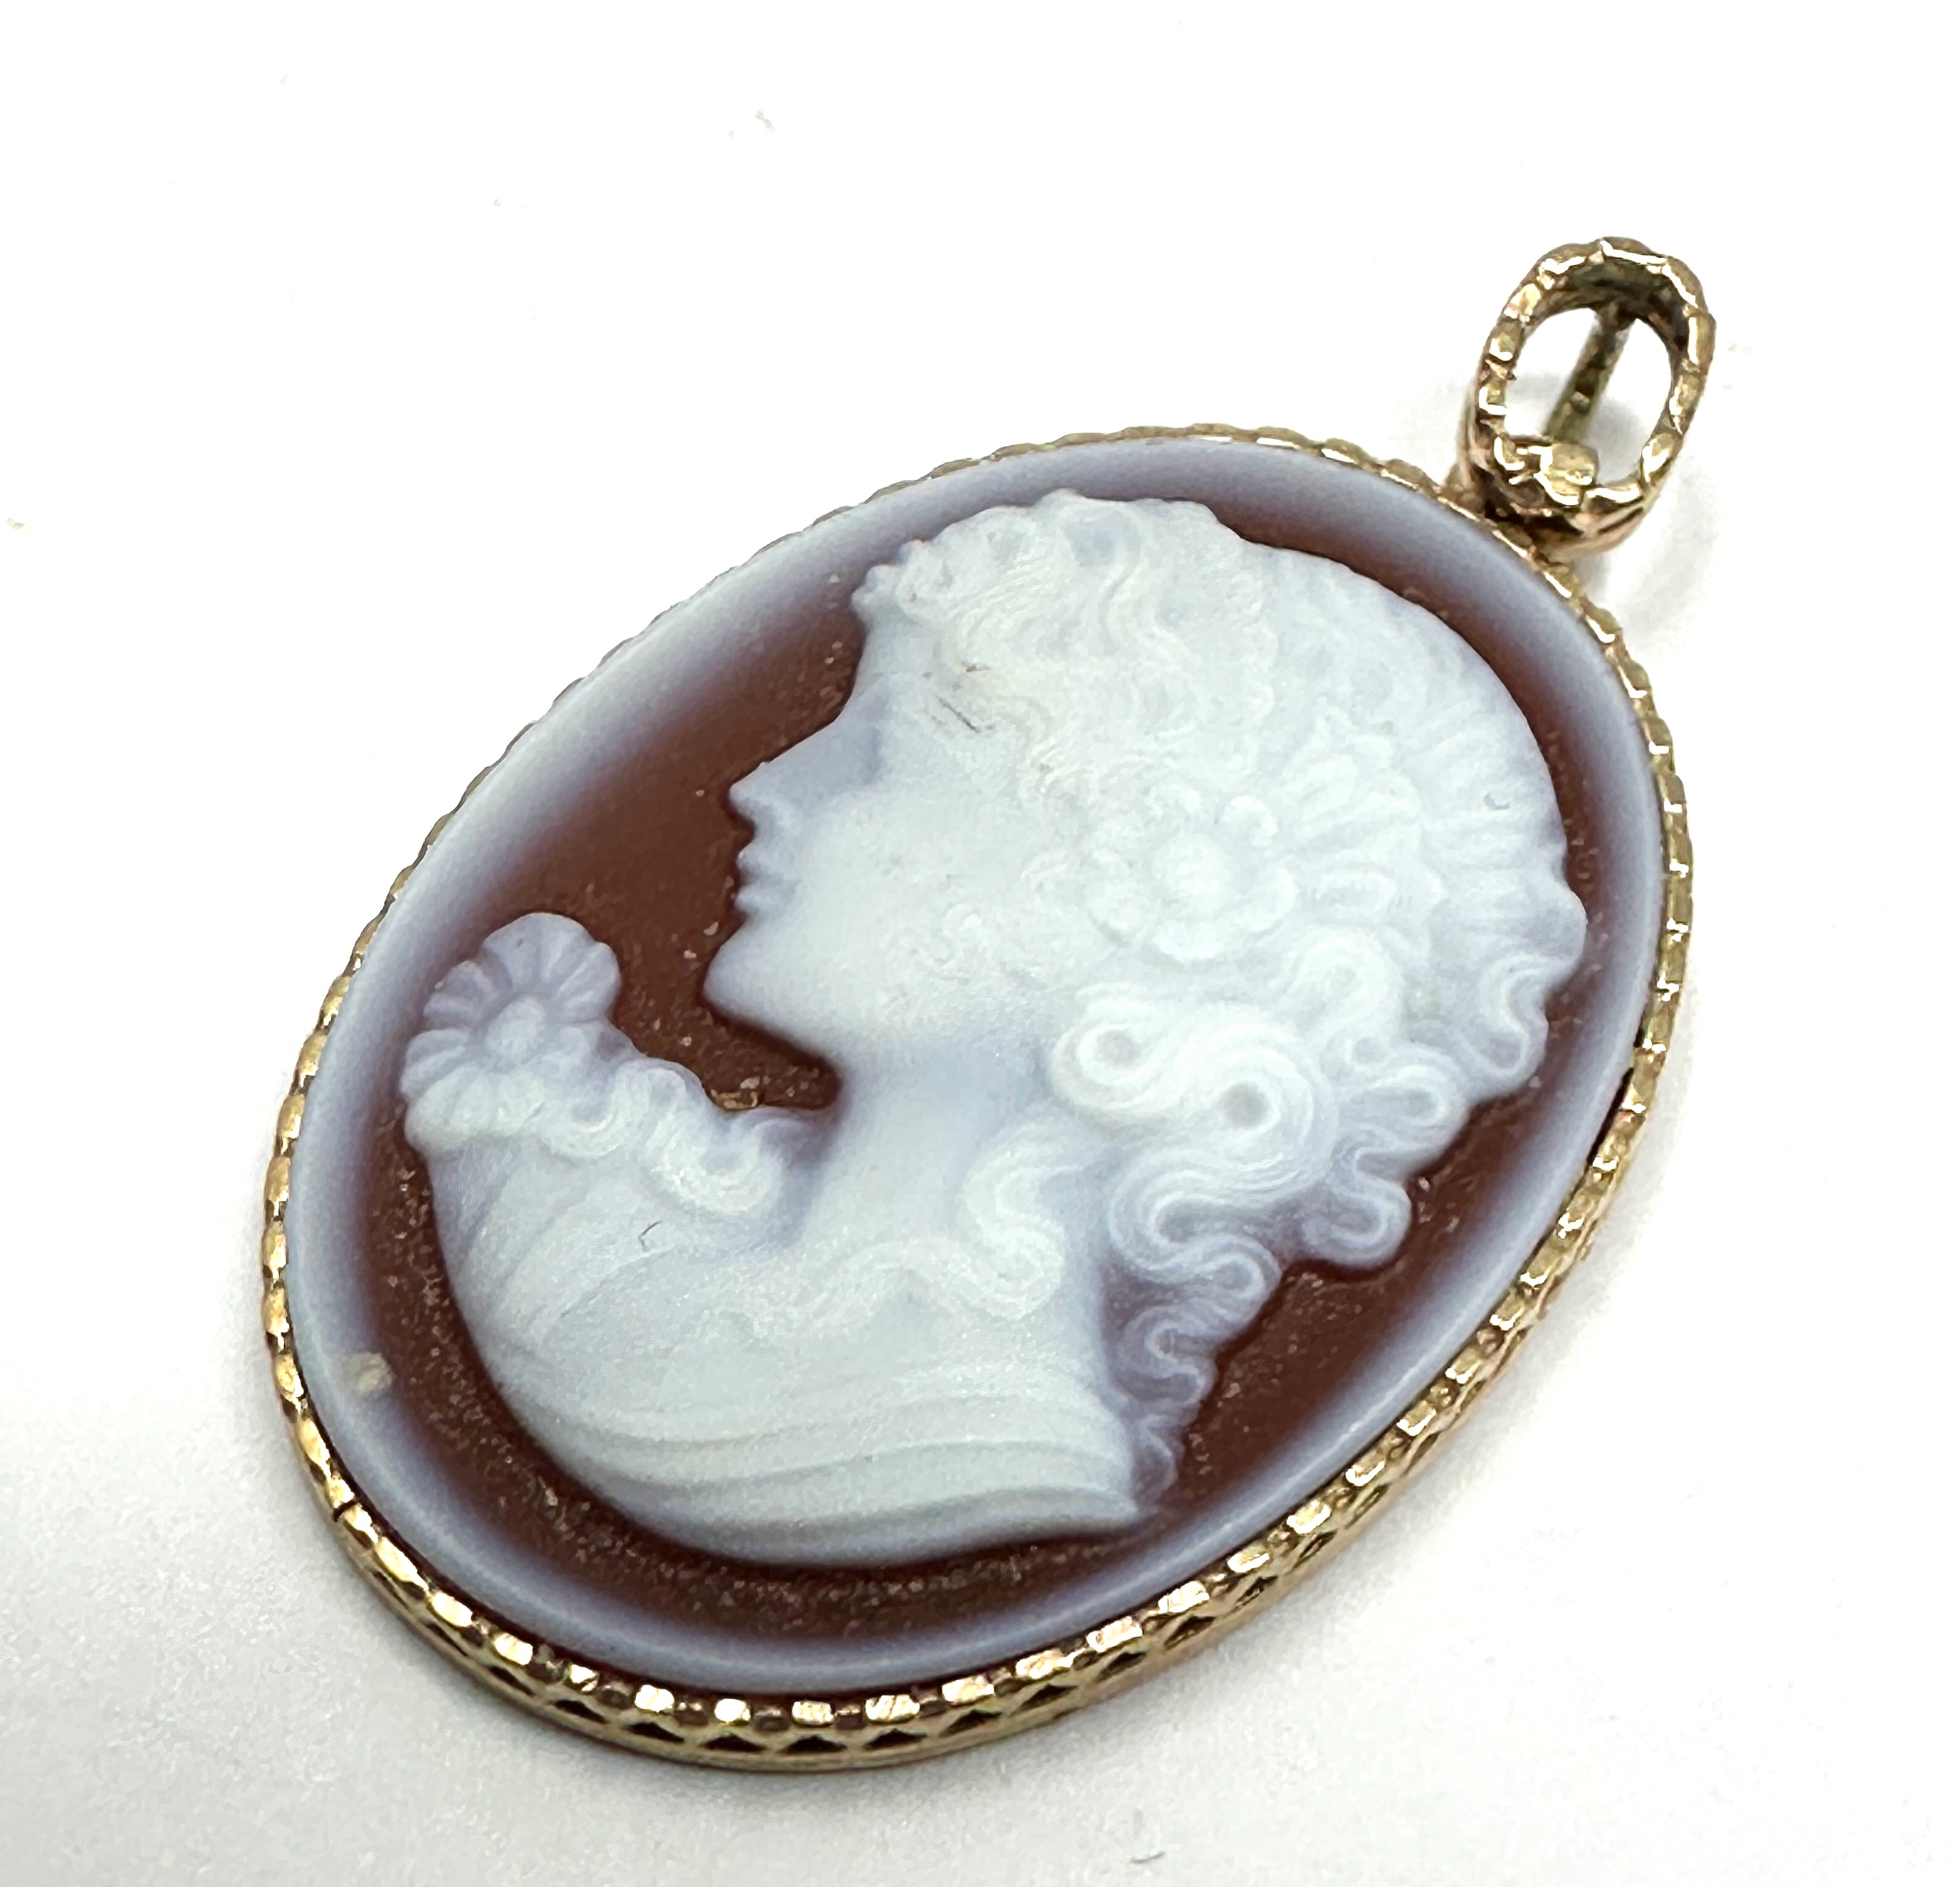 9ct gold framed hard stone cameo pendant measures approx 4cm drop by 2.3cm wide weight 5.5g